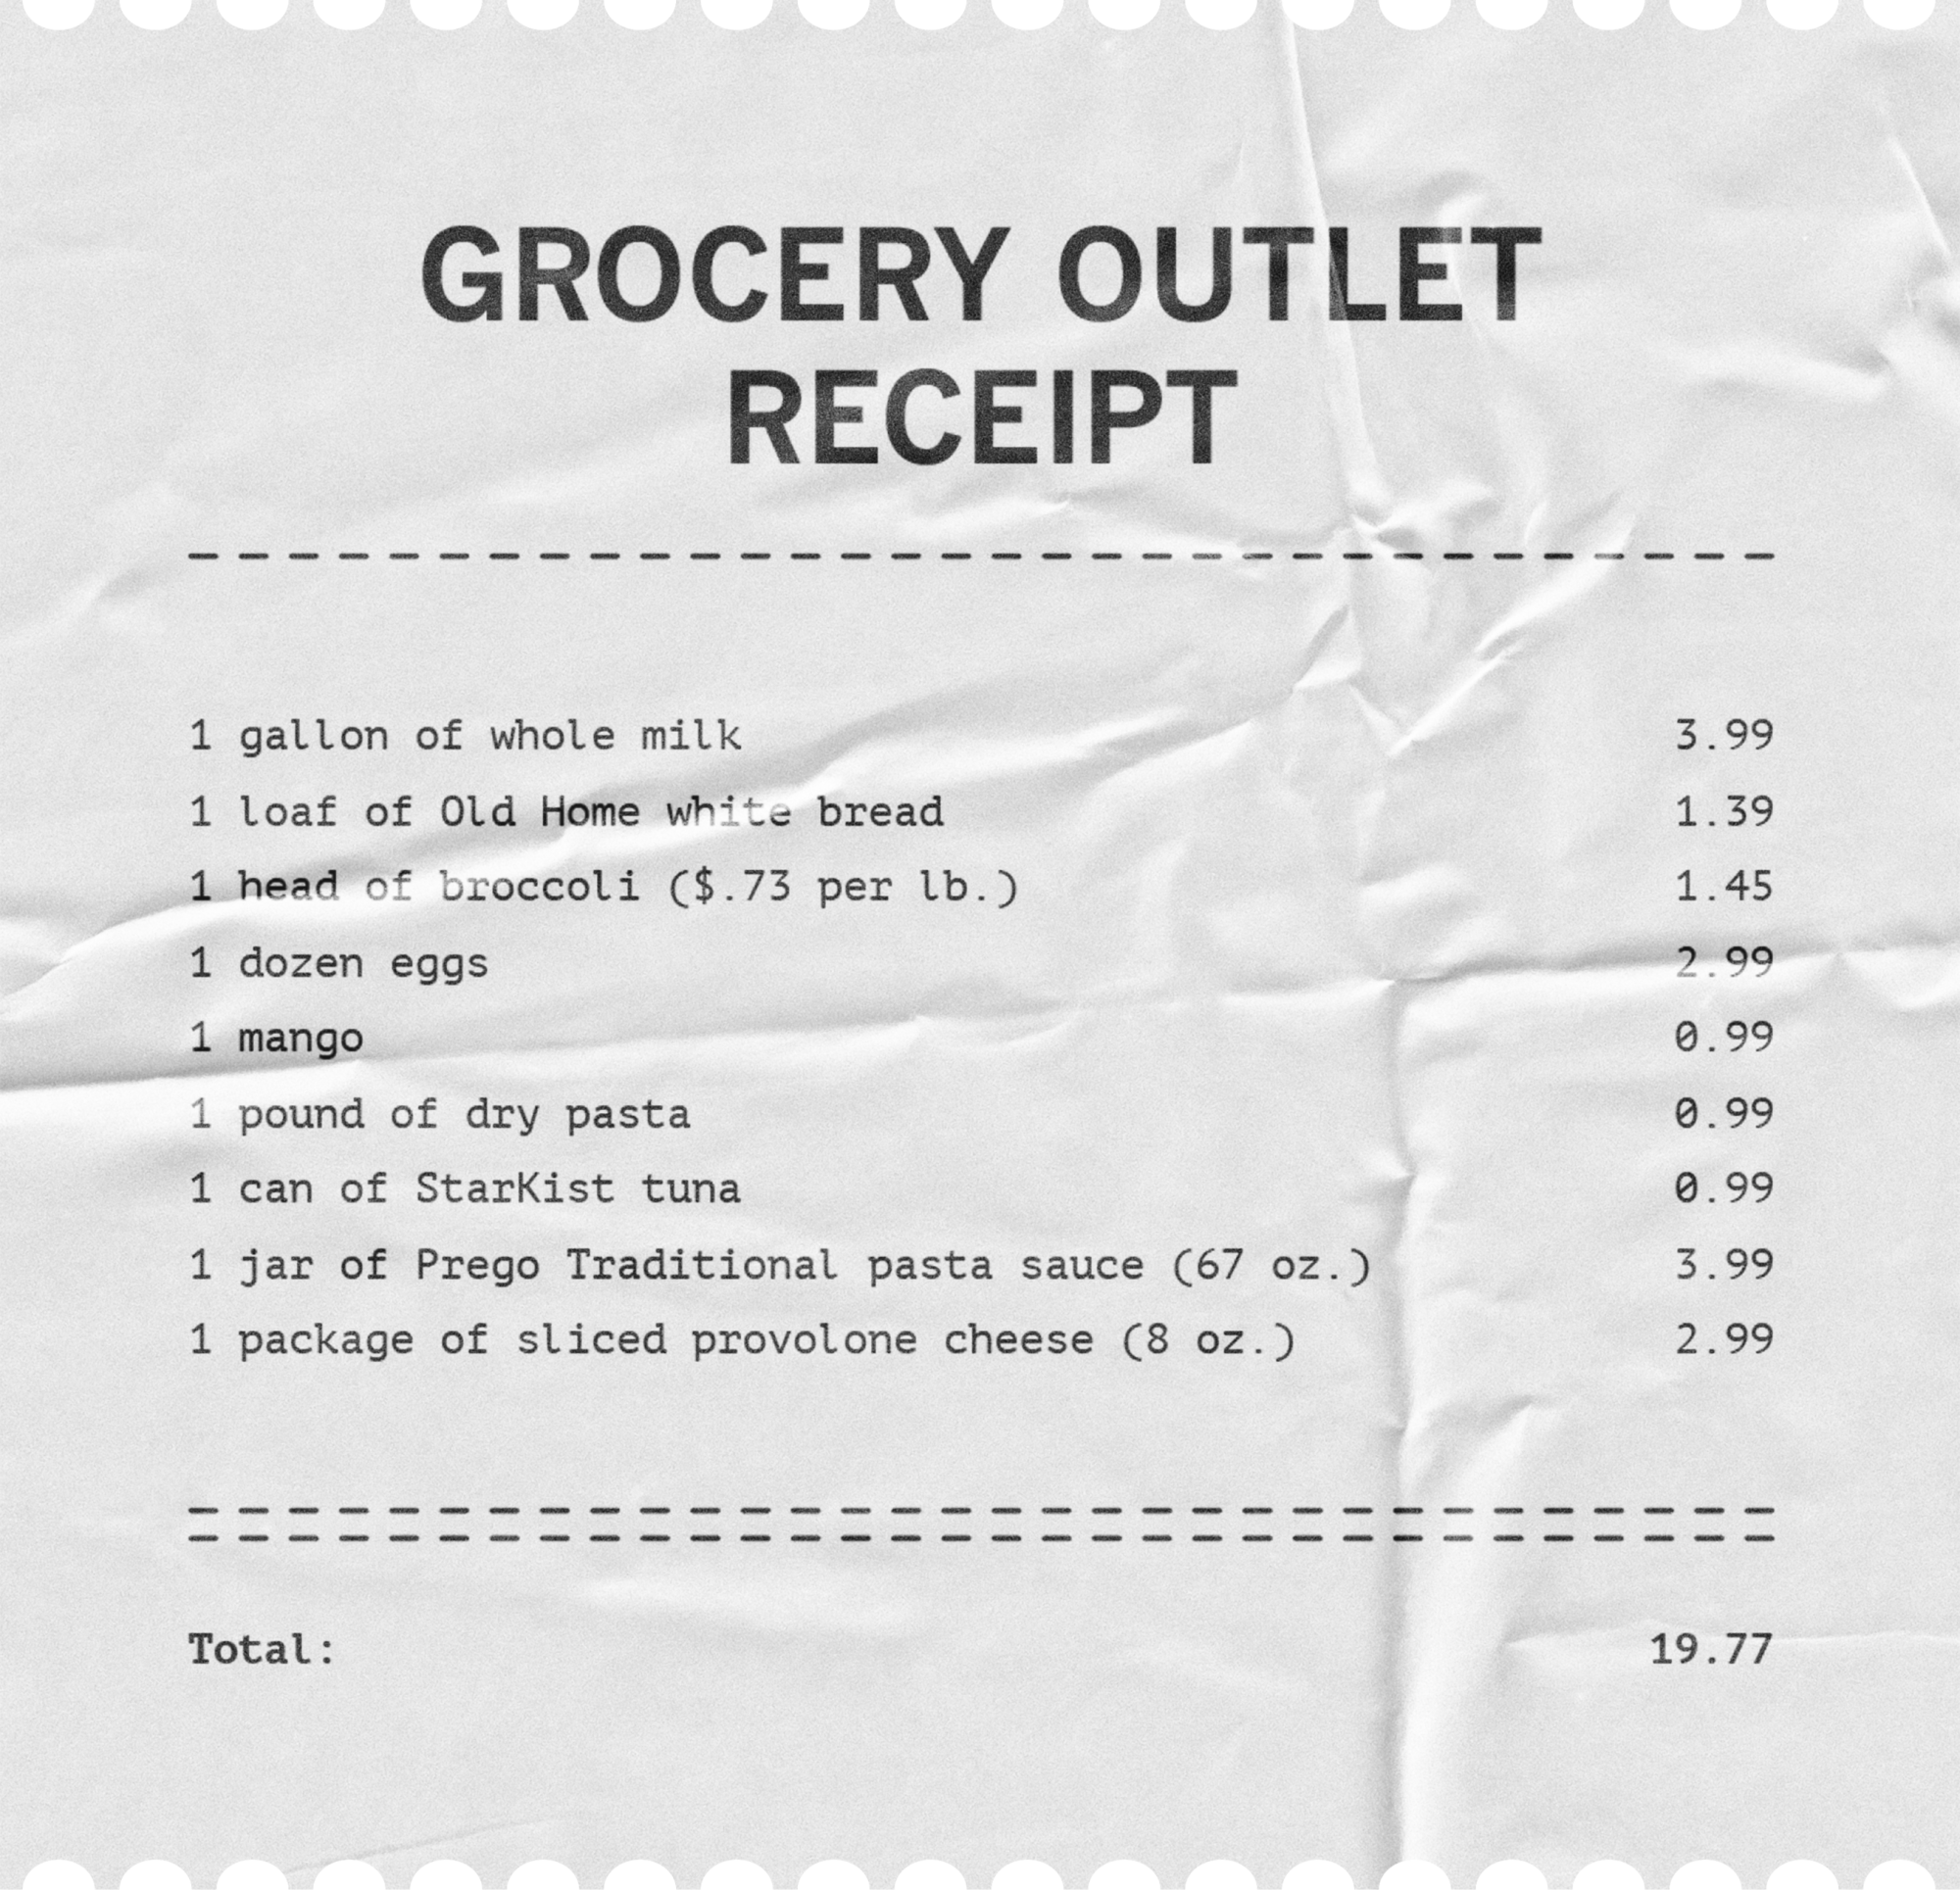 Grocery Outlet receipt